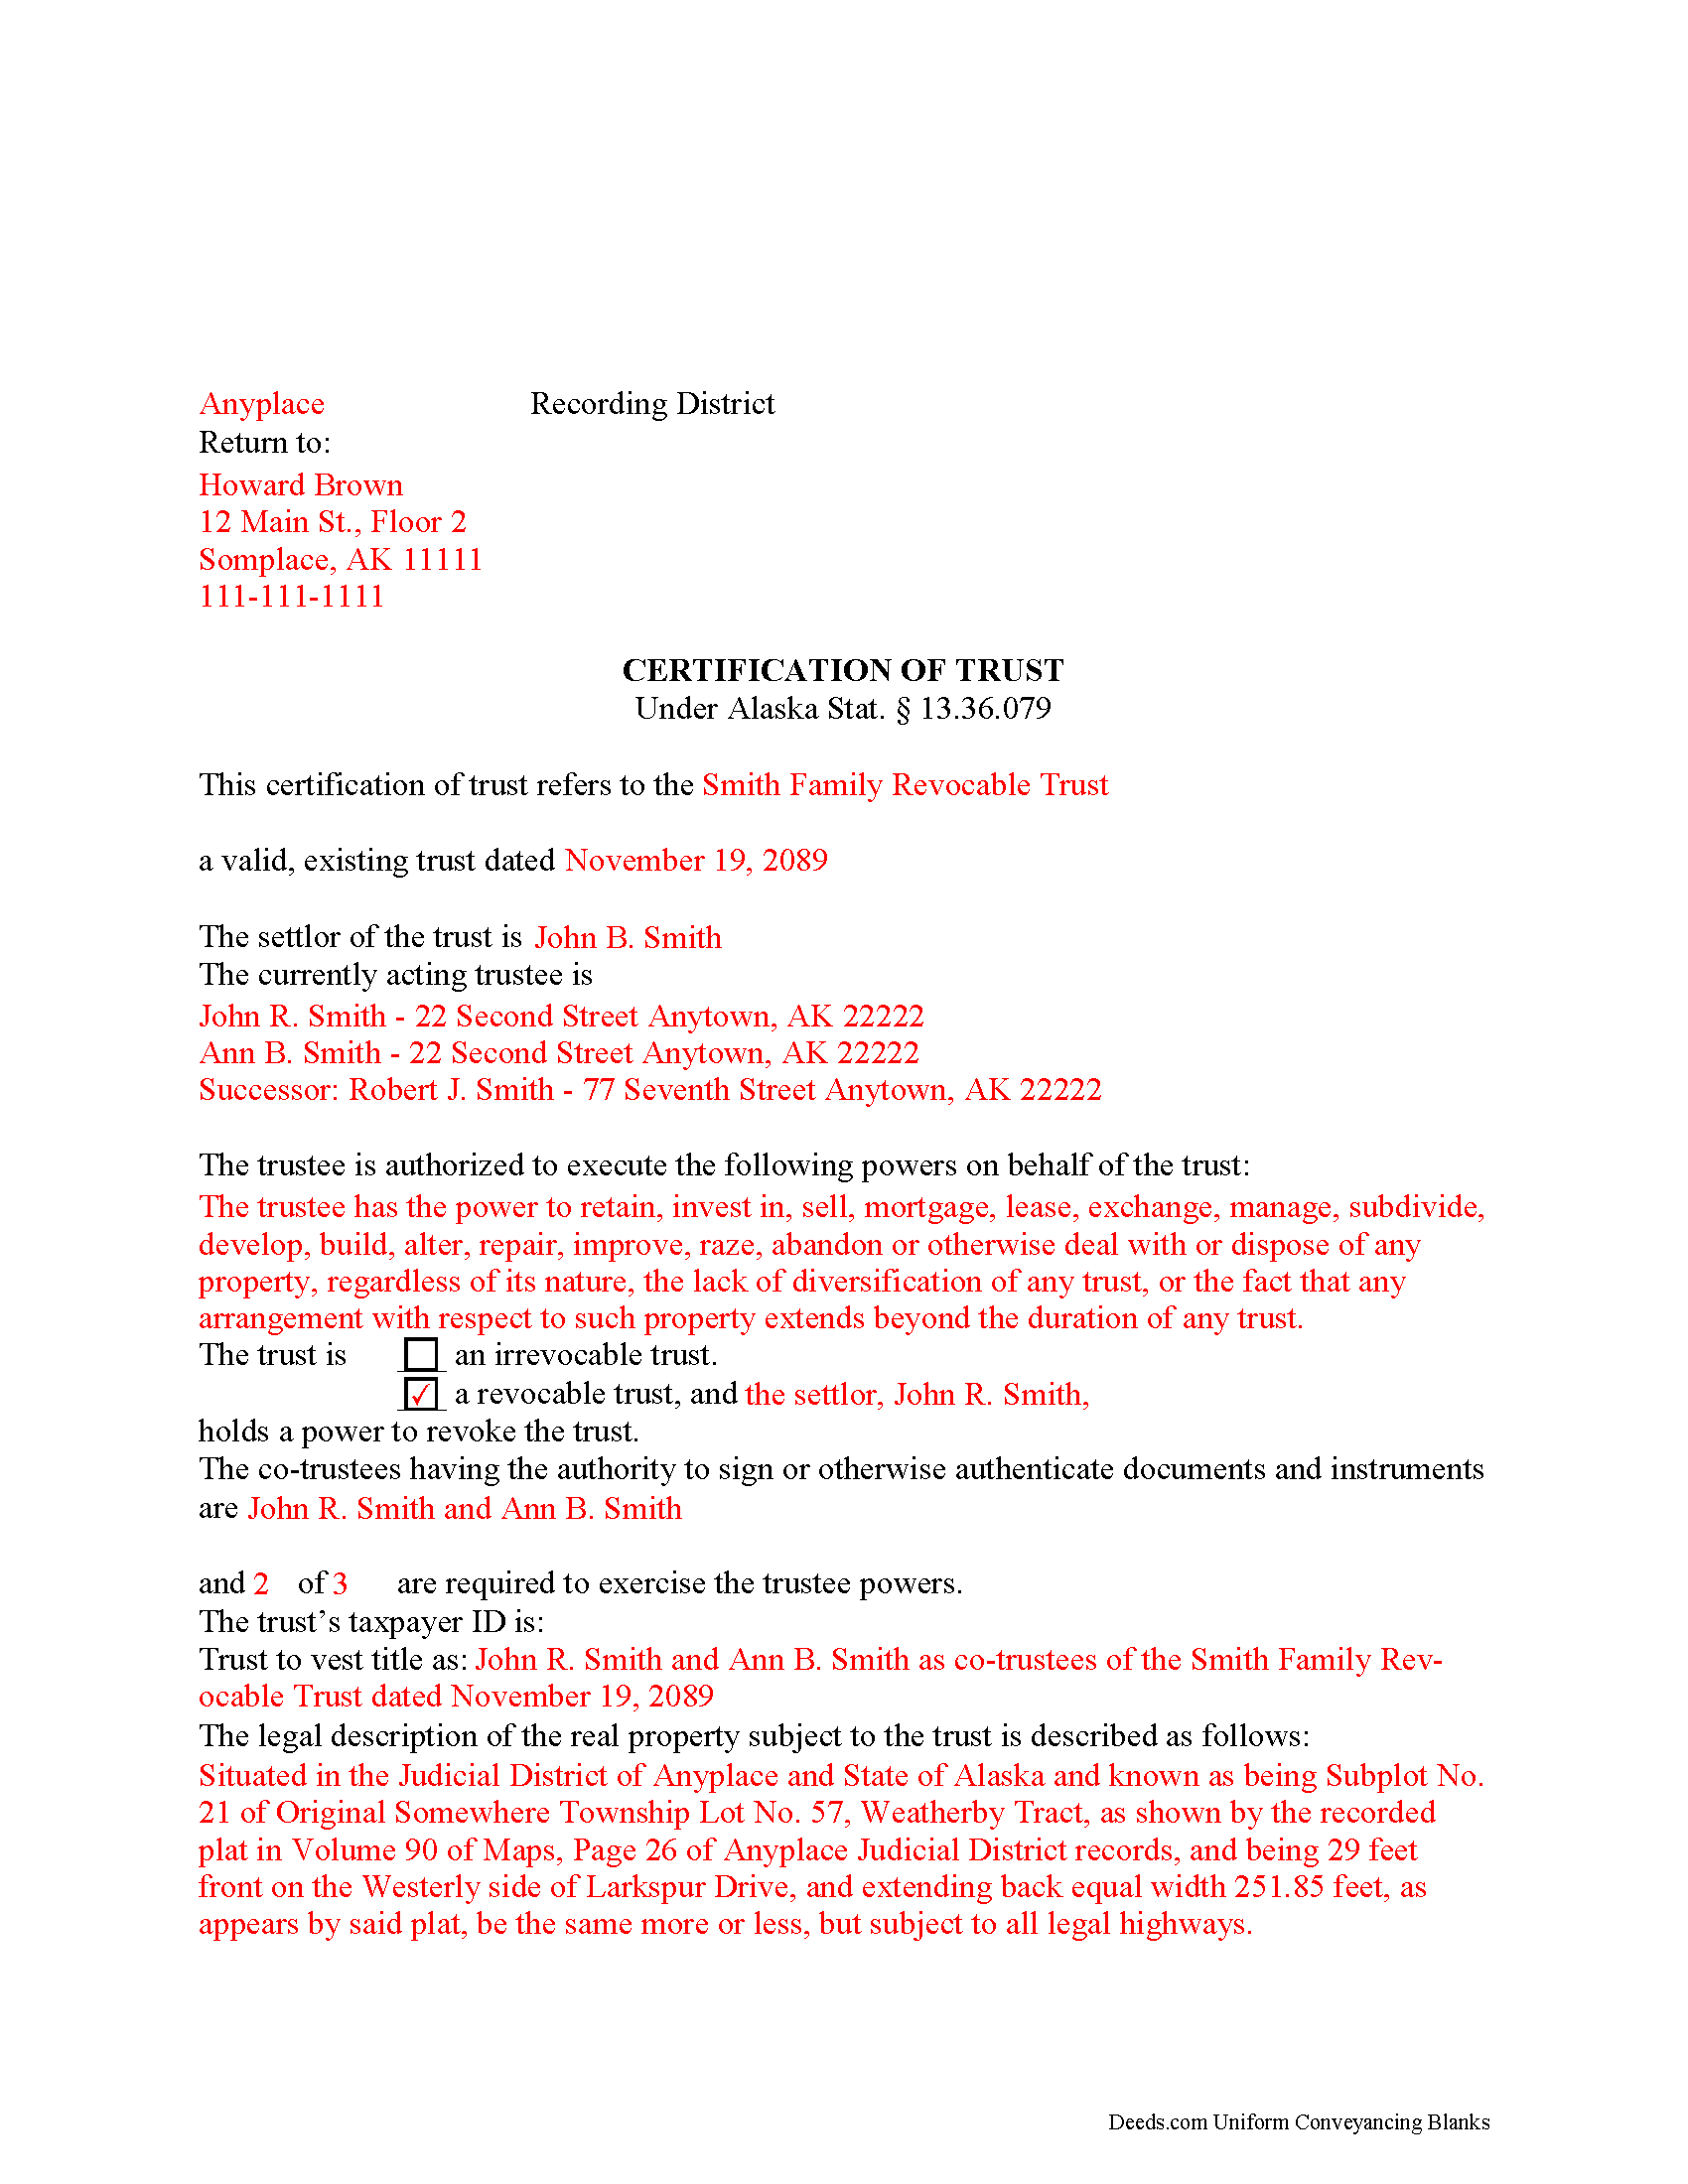 Completed Example of the Certificate of Trust Document